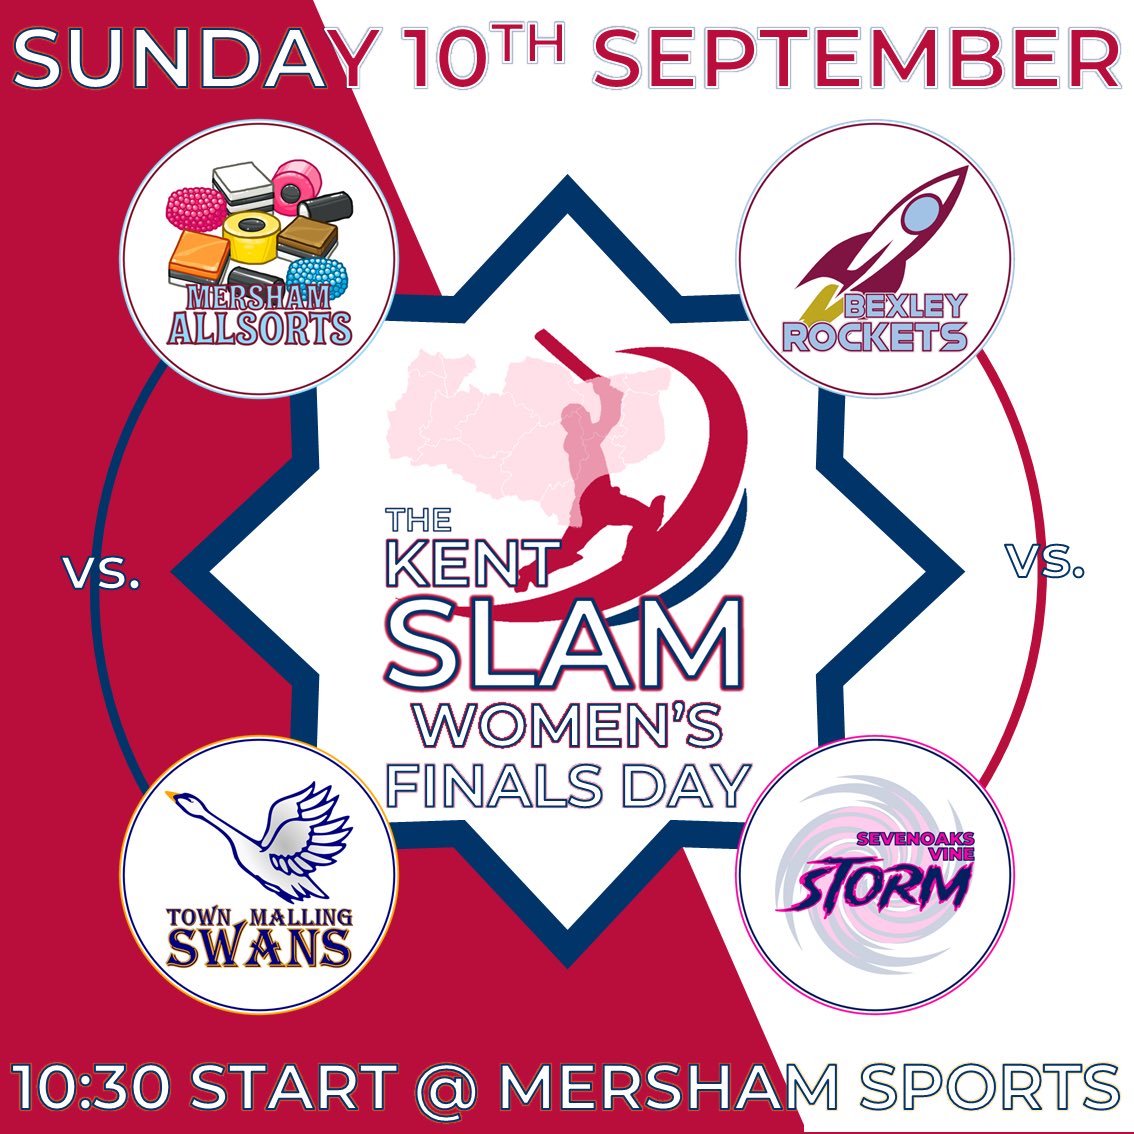 FINAL’S DAY The weather won’t scupper it this time! Tomorrow sees the first #KentSlam Women’s Finals take place at @Mershamsports The hosts’ AllSorts take on @TownMallingCC Swans whilst @BexleyCC Rockets face @SVCC1734 Storm, with the winners facing off at 16:00 All welcome